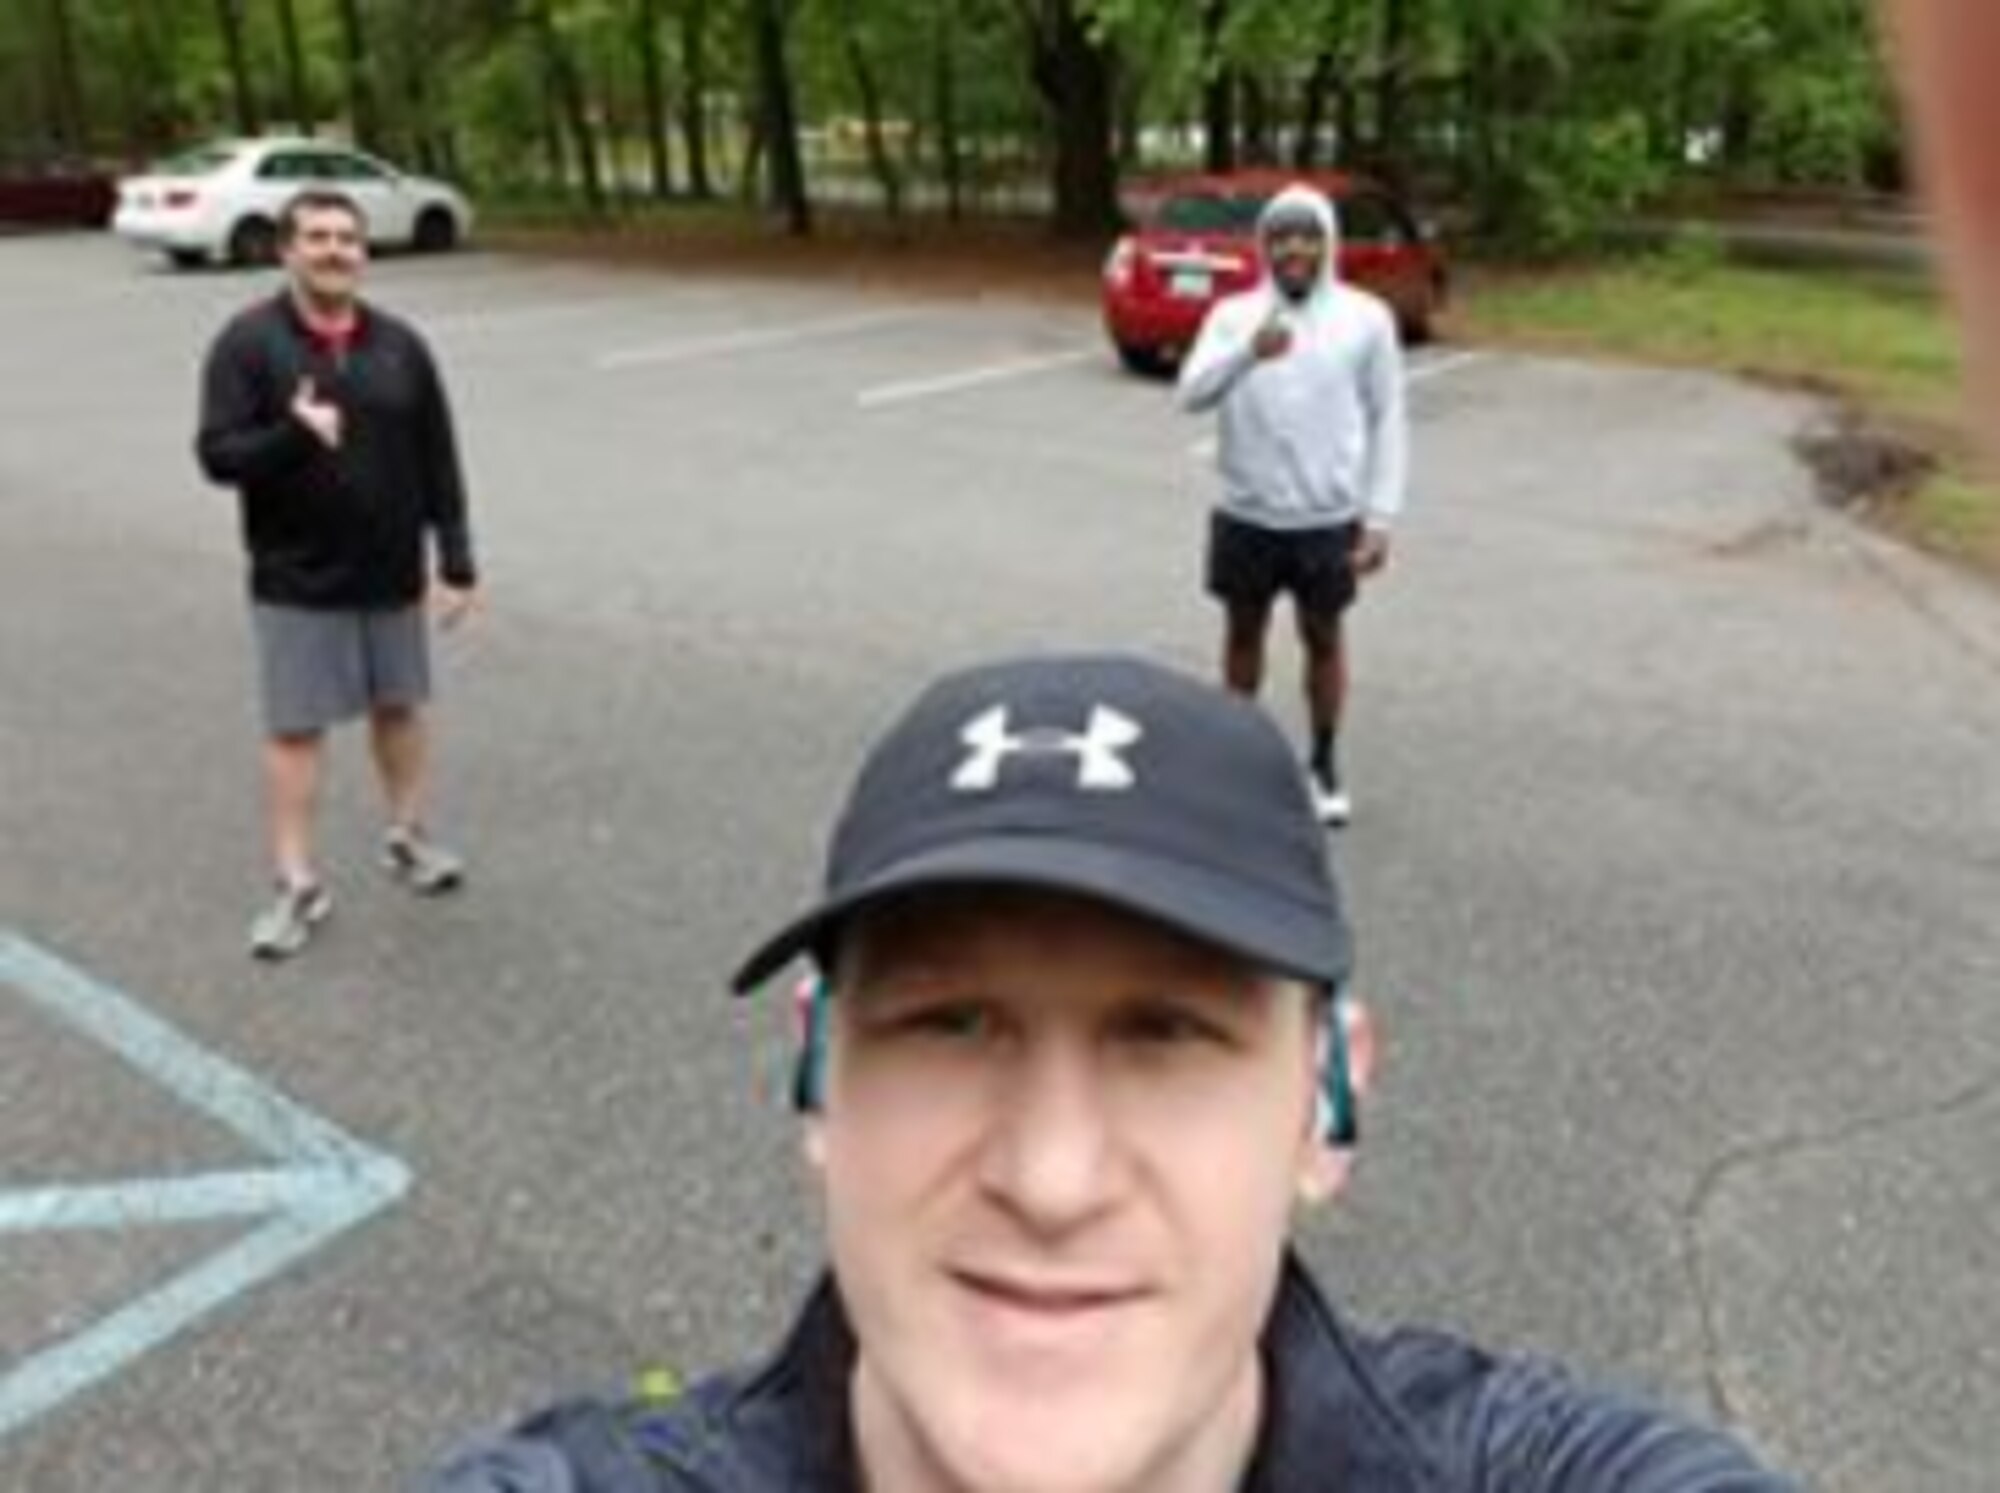 "Just finished a 5K with Capt Donovan and Capt Paden in remembrance of the heroes we lost on this day including our very own, Maj Ransom,” said Jared Ward, in a post to the 83rd Network Operations Squadron Facebook page. The 83rd Network Operations Squadron at Joint Base Langley-Eustis, Virginia, has a conference room dedicated to the memory of U.S. Air Force Major Charles Ransom, flight commander of plans and operations, 83rd Network Operations Squadron, who gave his life during a deployment April 27, 2011. (Courtesy photo)